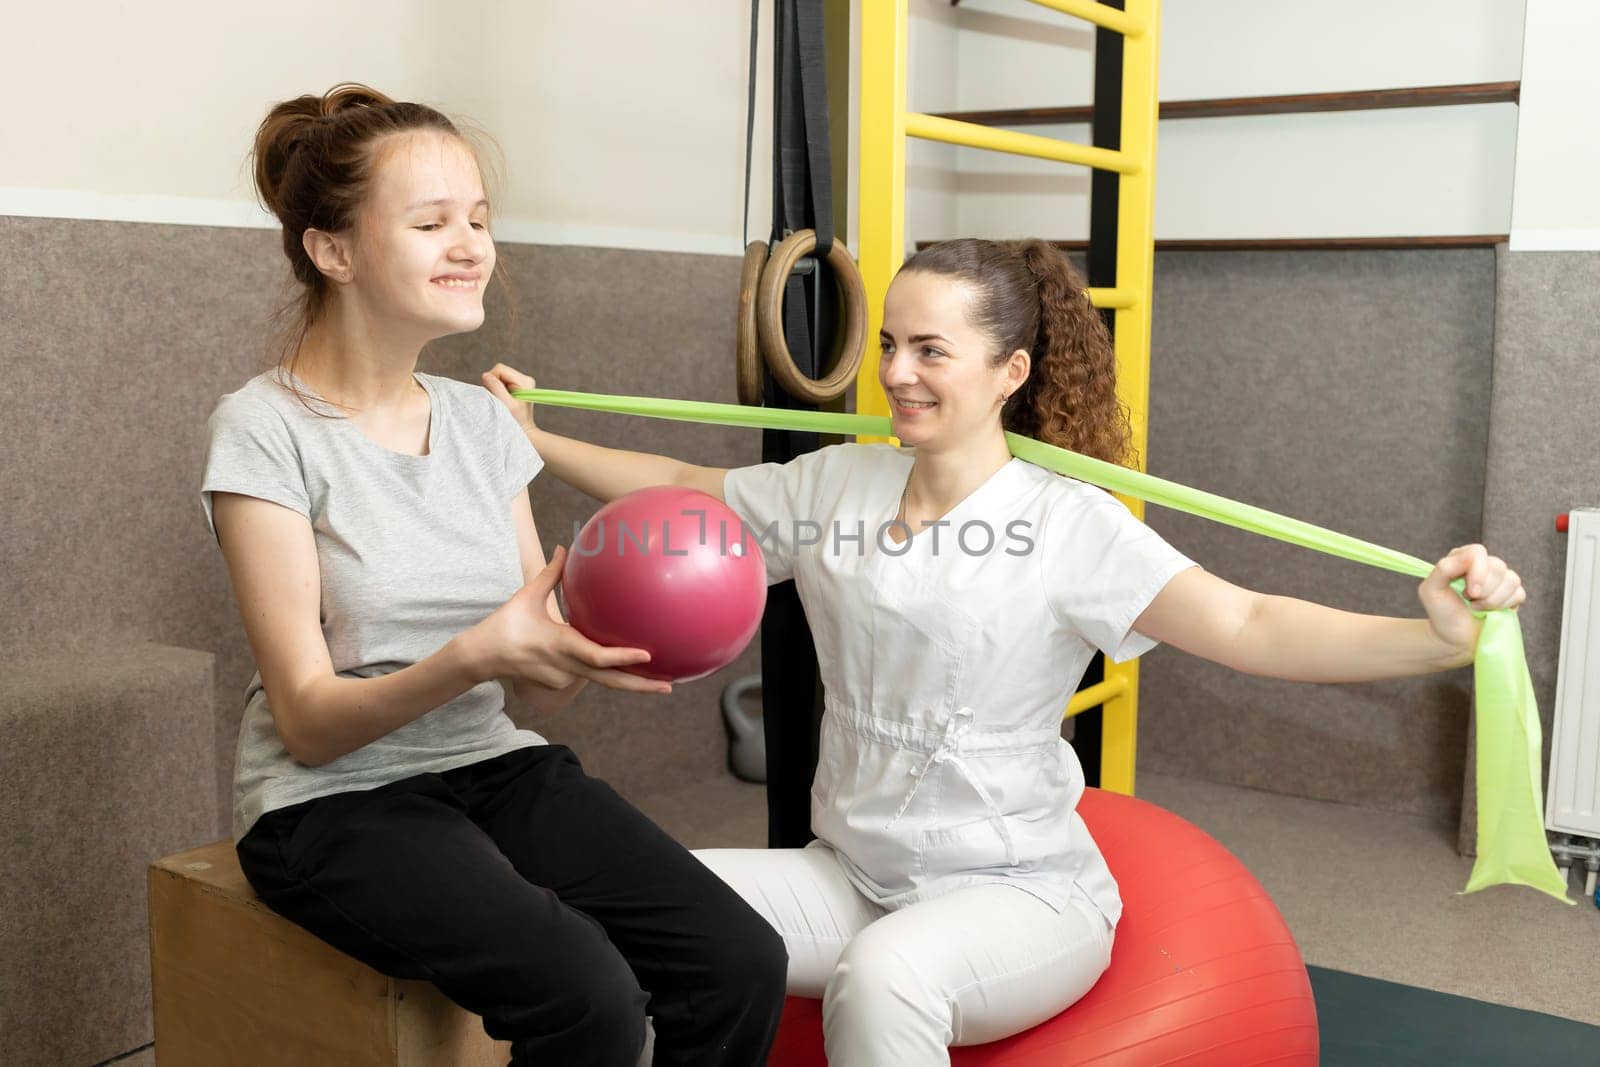 Smiling Child, Teenage Girl With Disability Does Physical Exercises With Support Of Rehabilitation Specialist, Physical Therapist. Rehabilitation. Musculoskeletal Disorder. Horizontal plane by netatsi